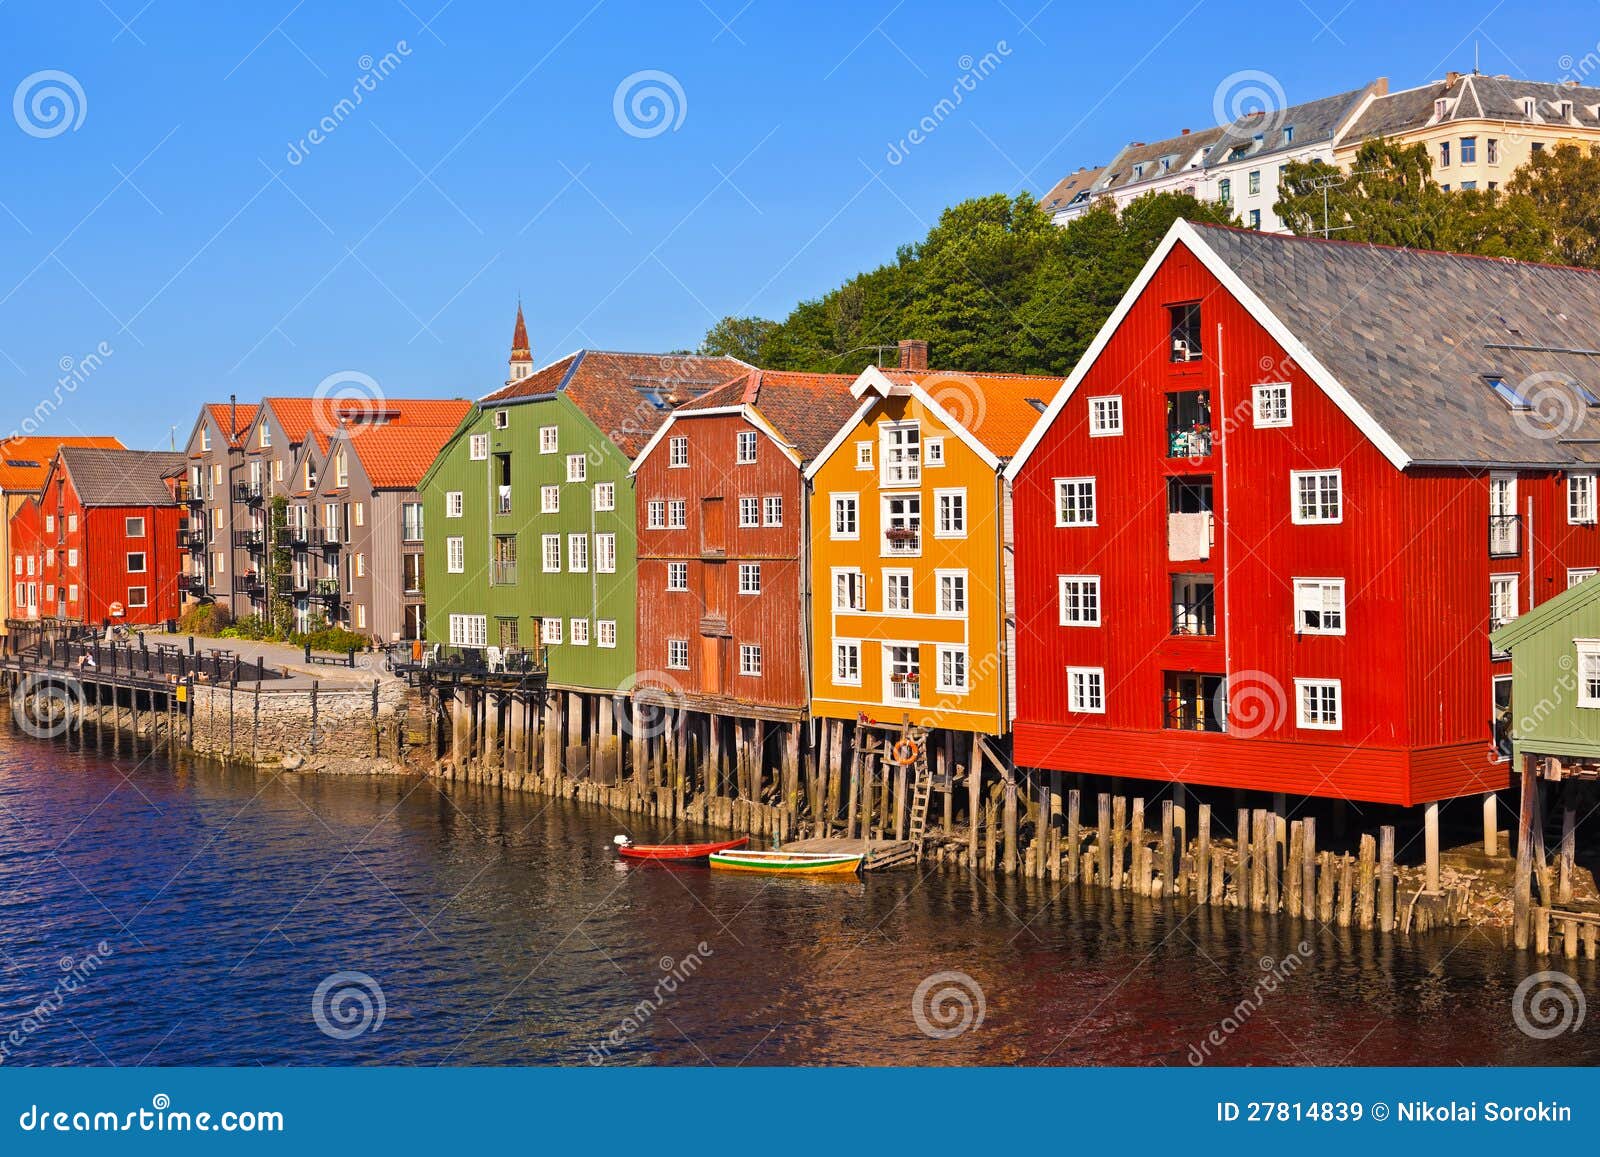 cityscape of trondheim, norway